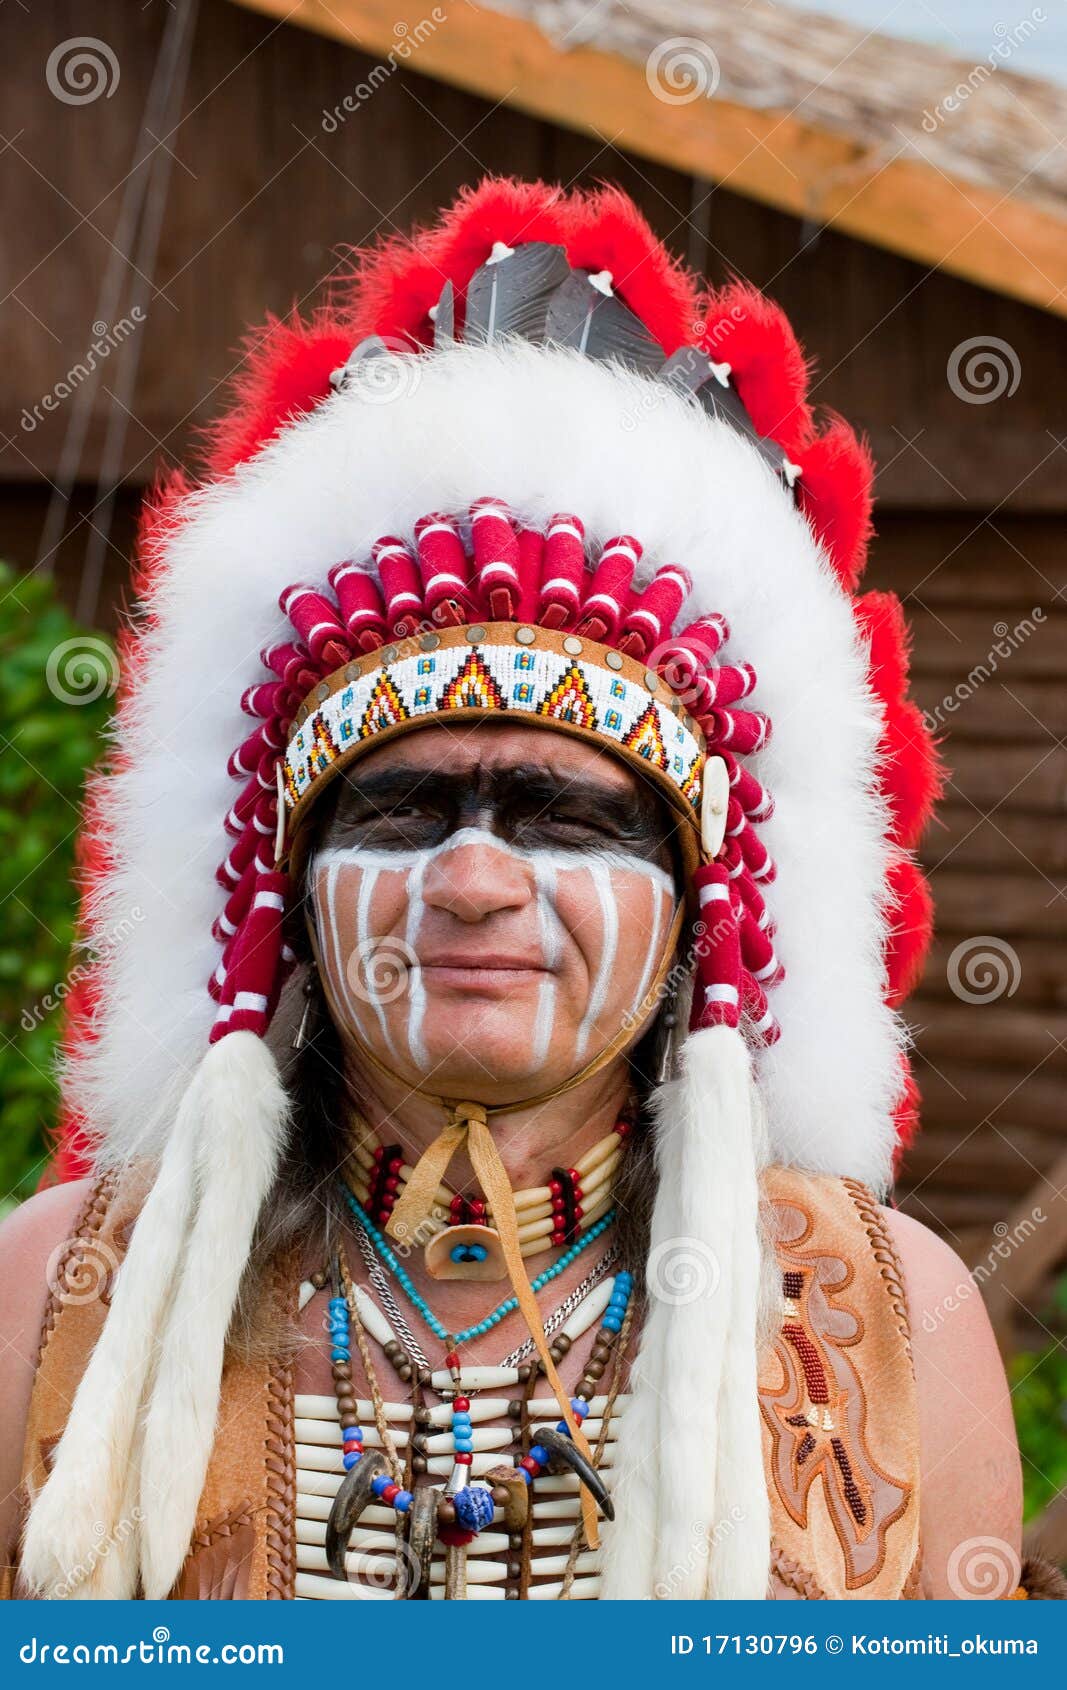 North American Indian Royalty Free Stock Image - Image: 17130796